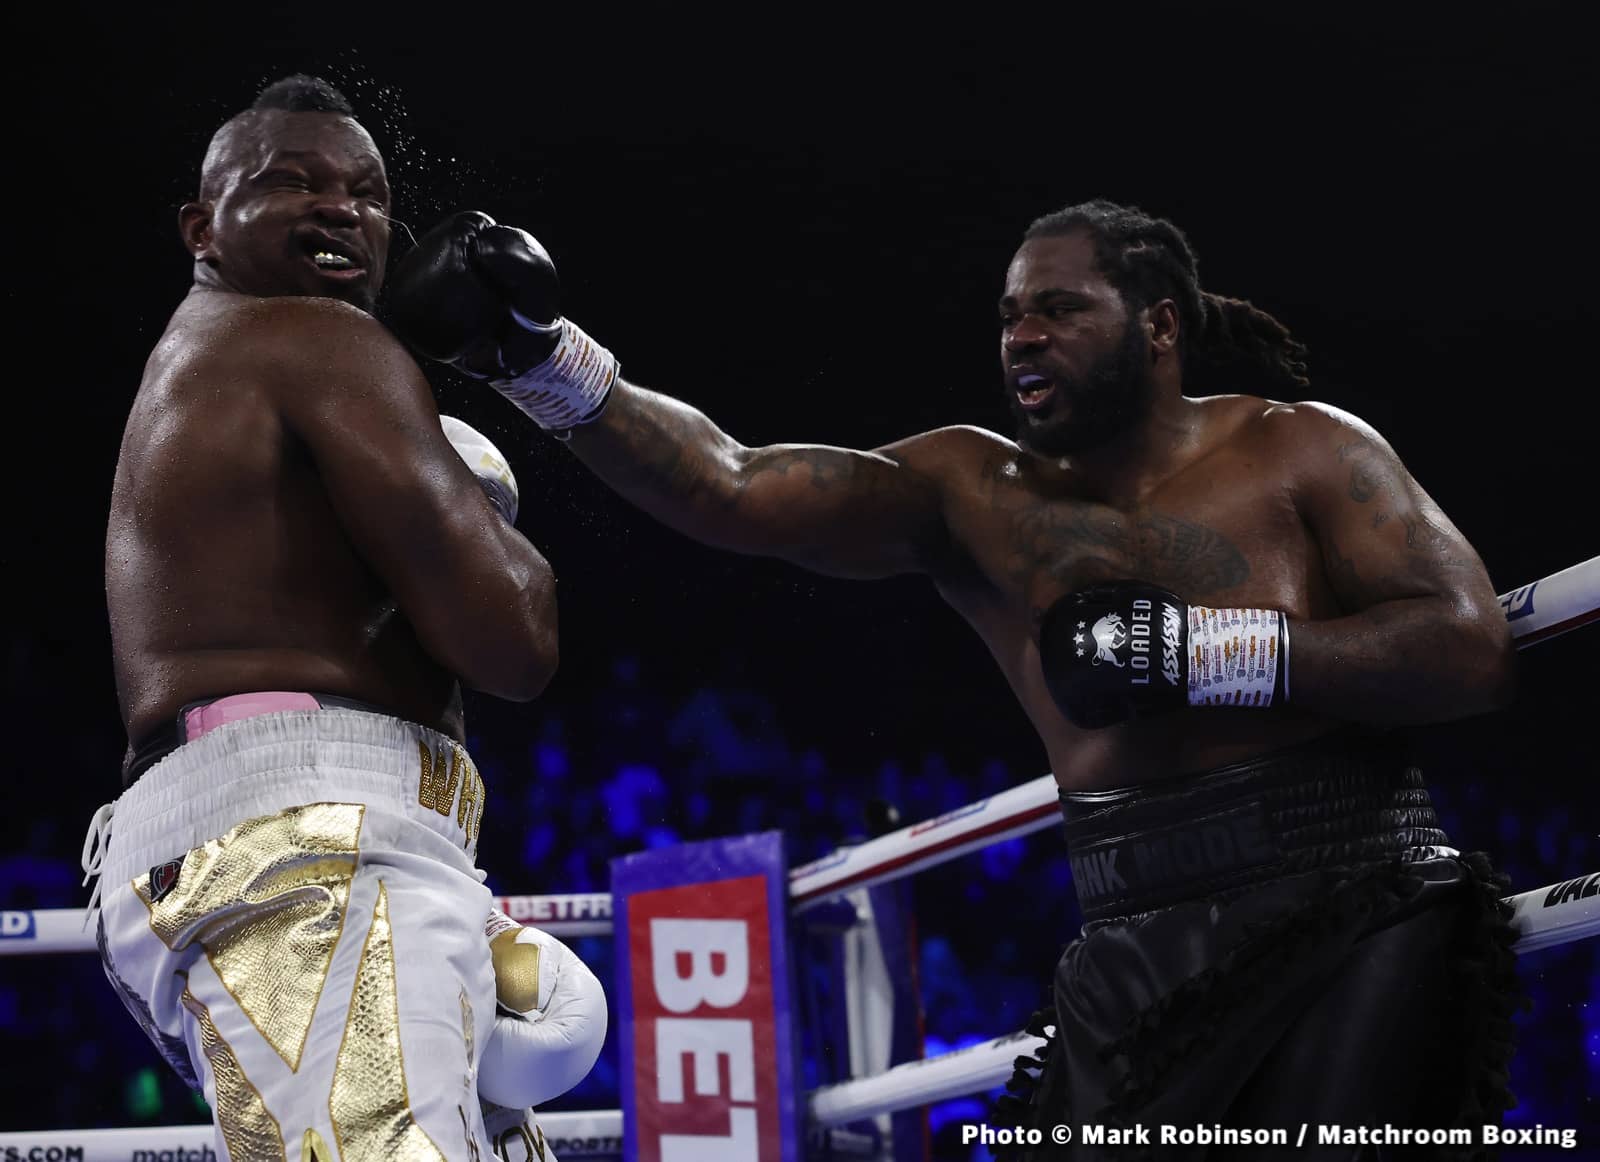 Whyte vs. Jermaine Franklin - tonight's live results from London